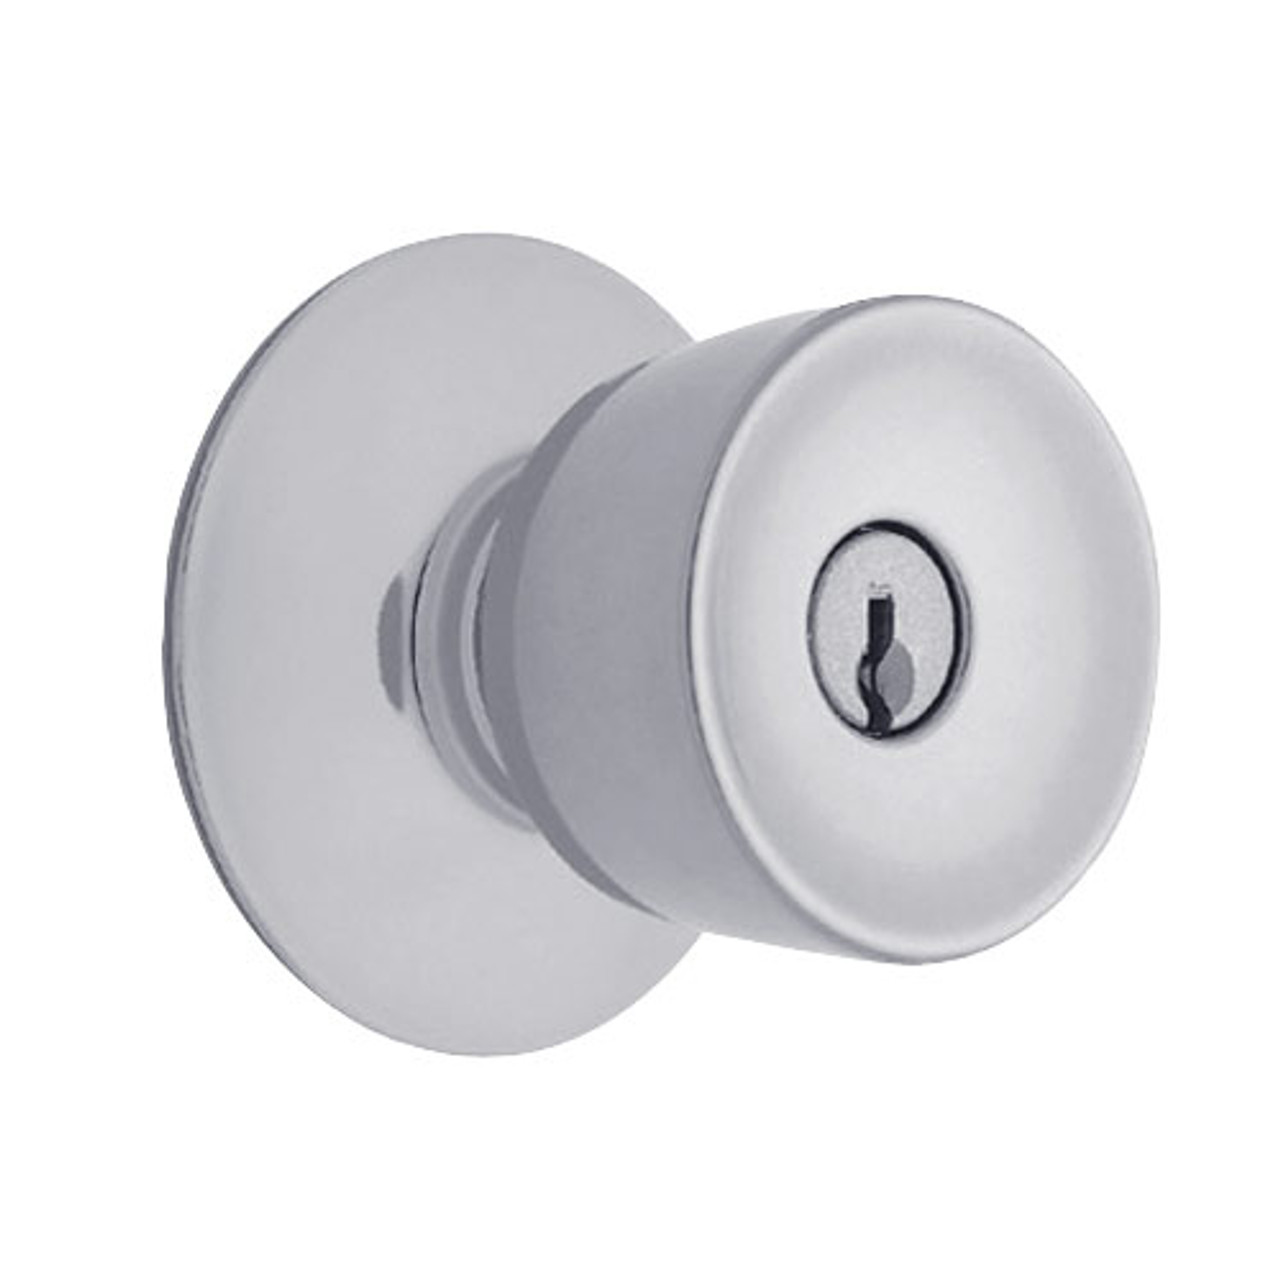 Schlage A40S TUL 626 Series A Grade 2 Cylindrical Lock Privacy Function Tulip Design Satin Chrome Finish Keyless